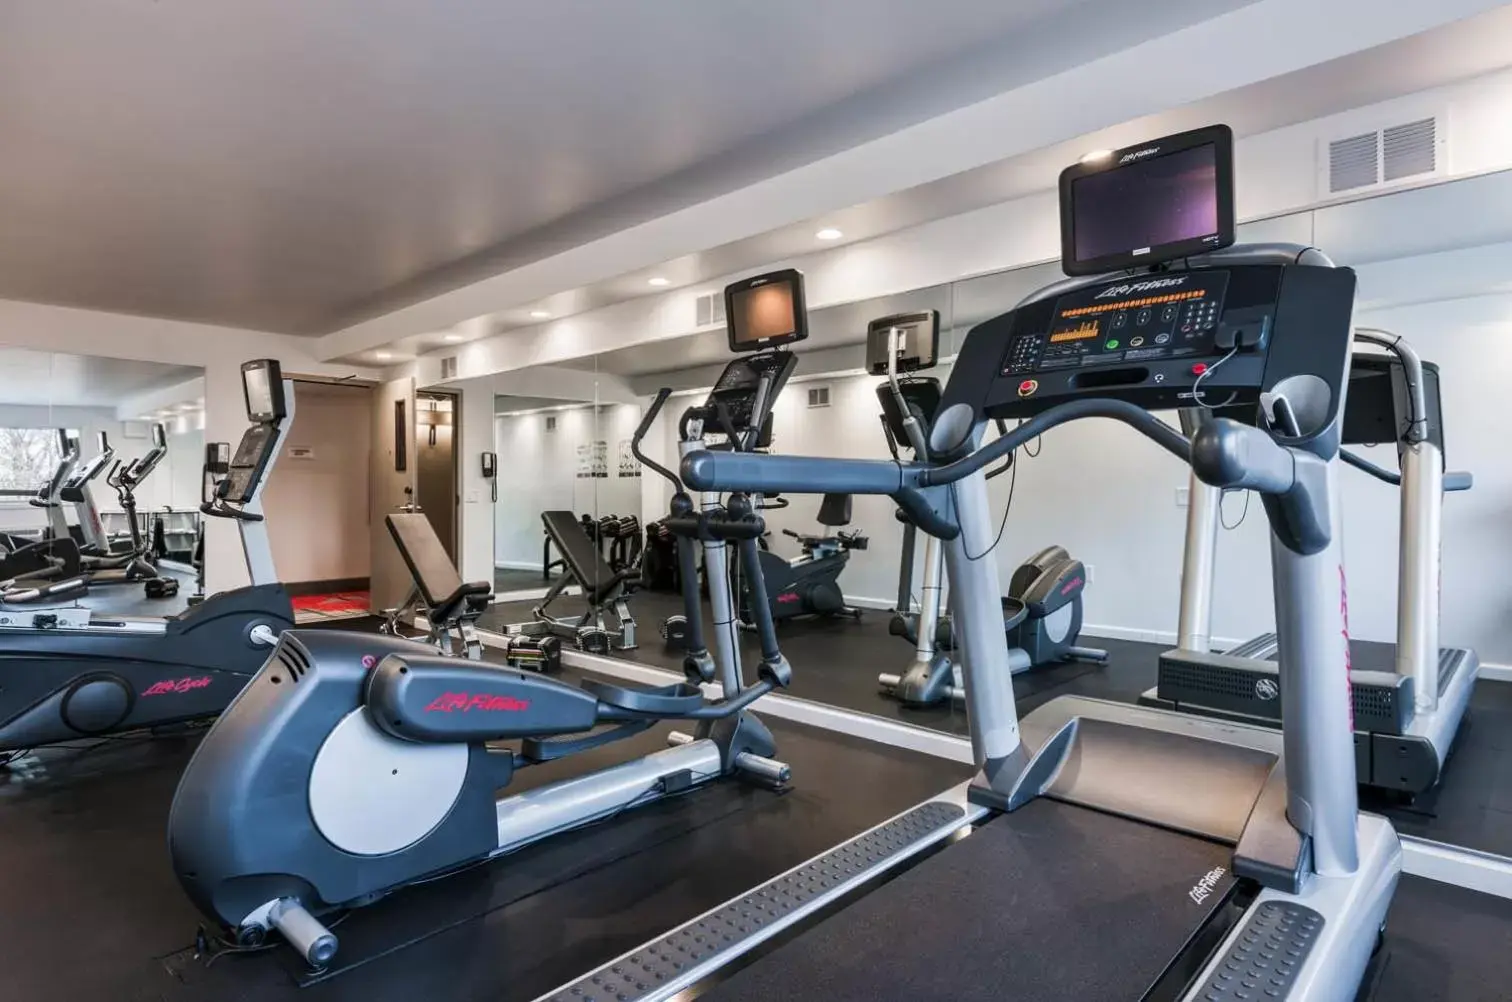 Fitness centre/facilities, Fitness Center/Facilities in The Kenilworth